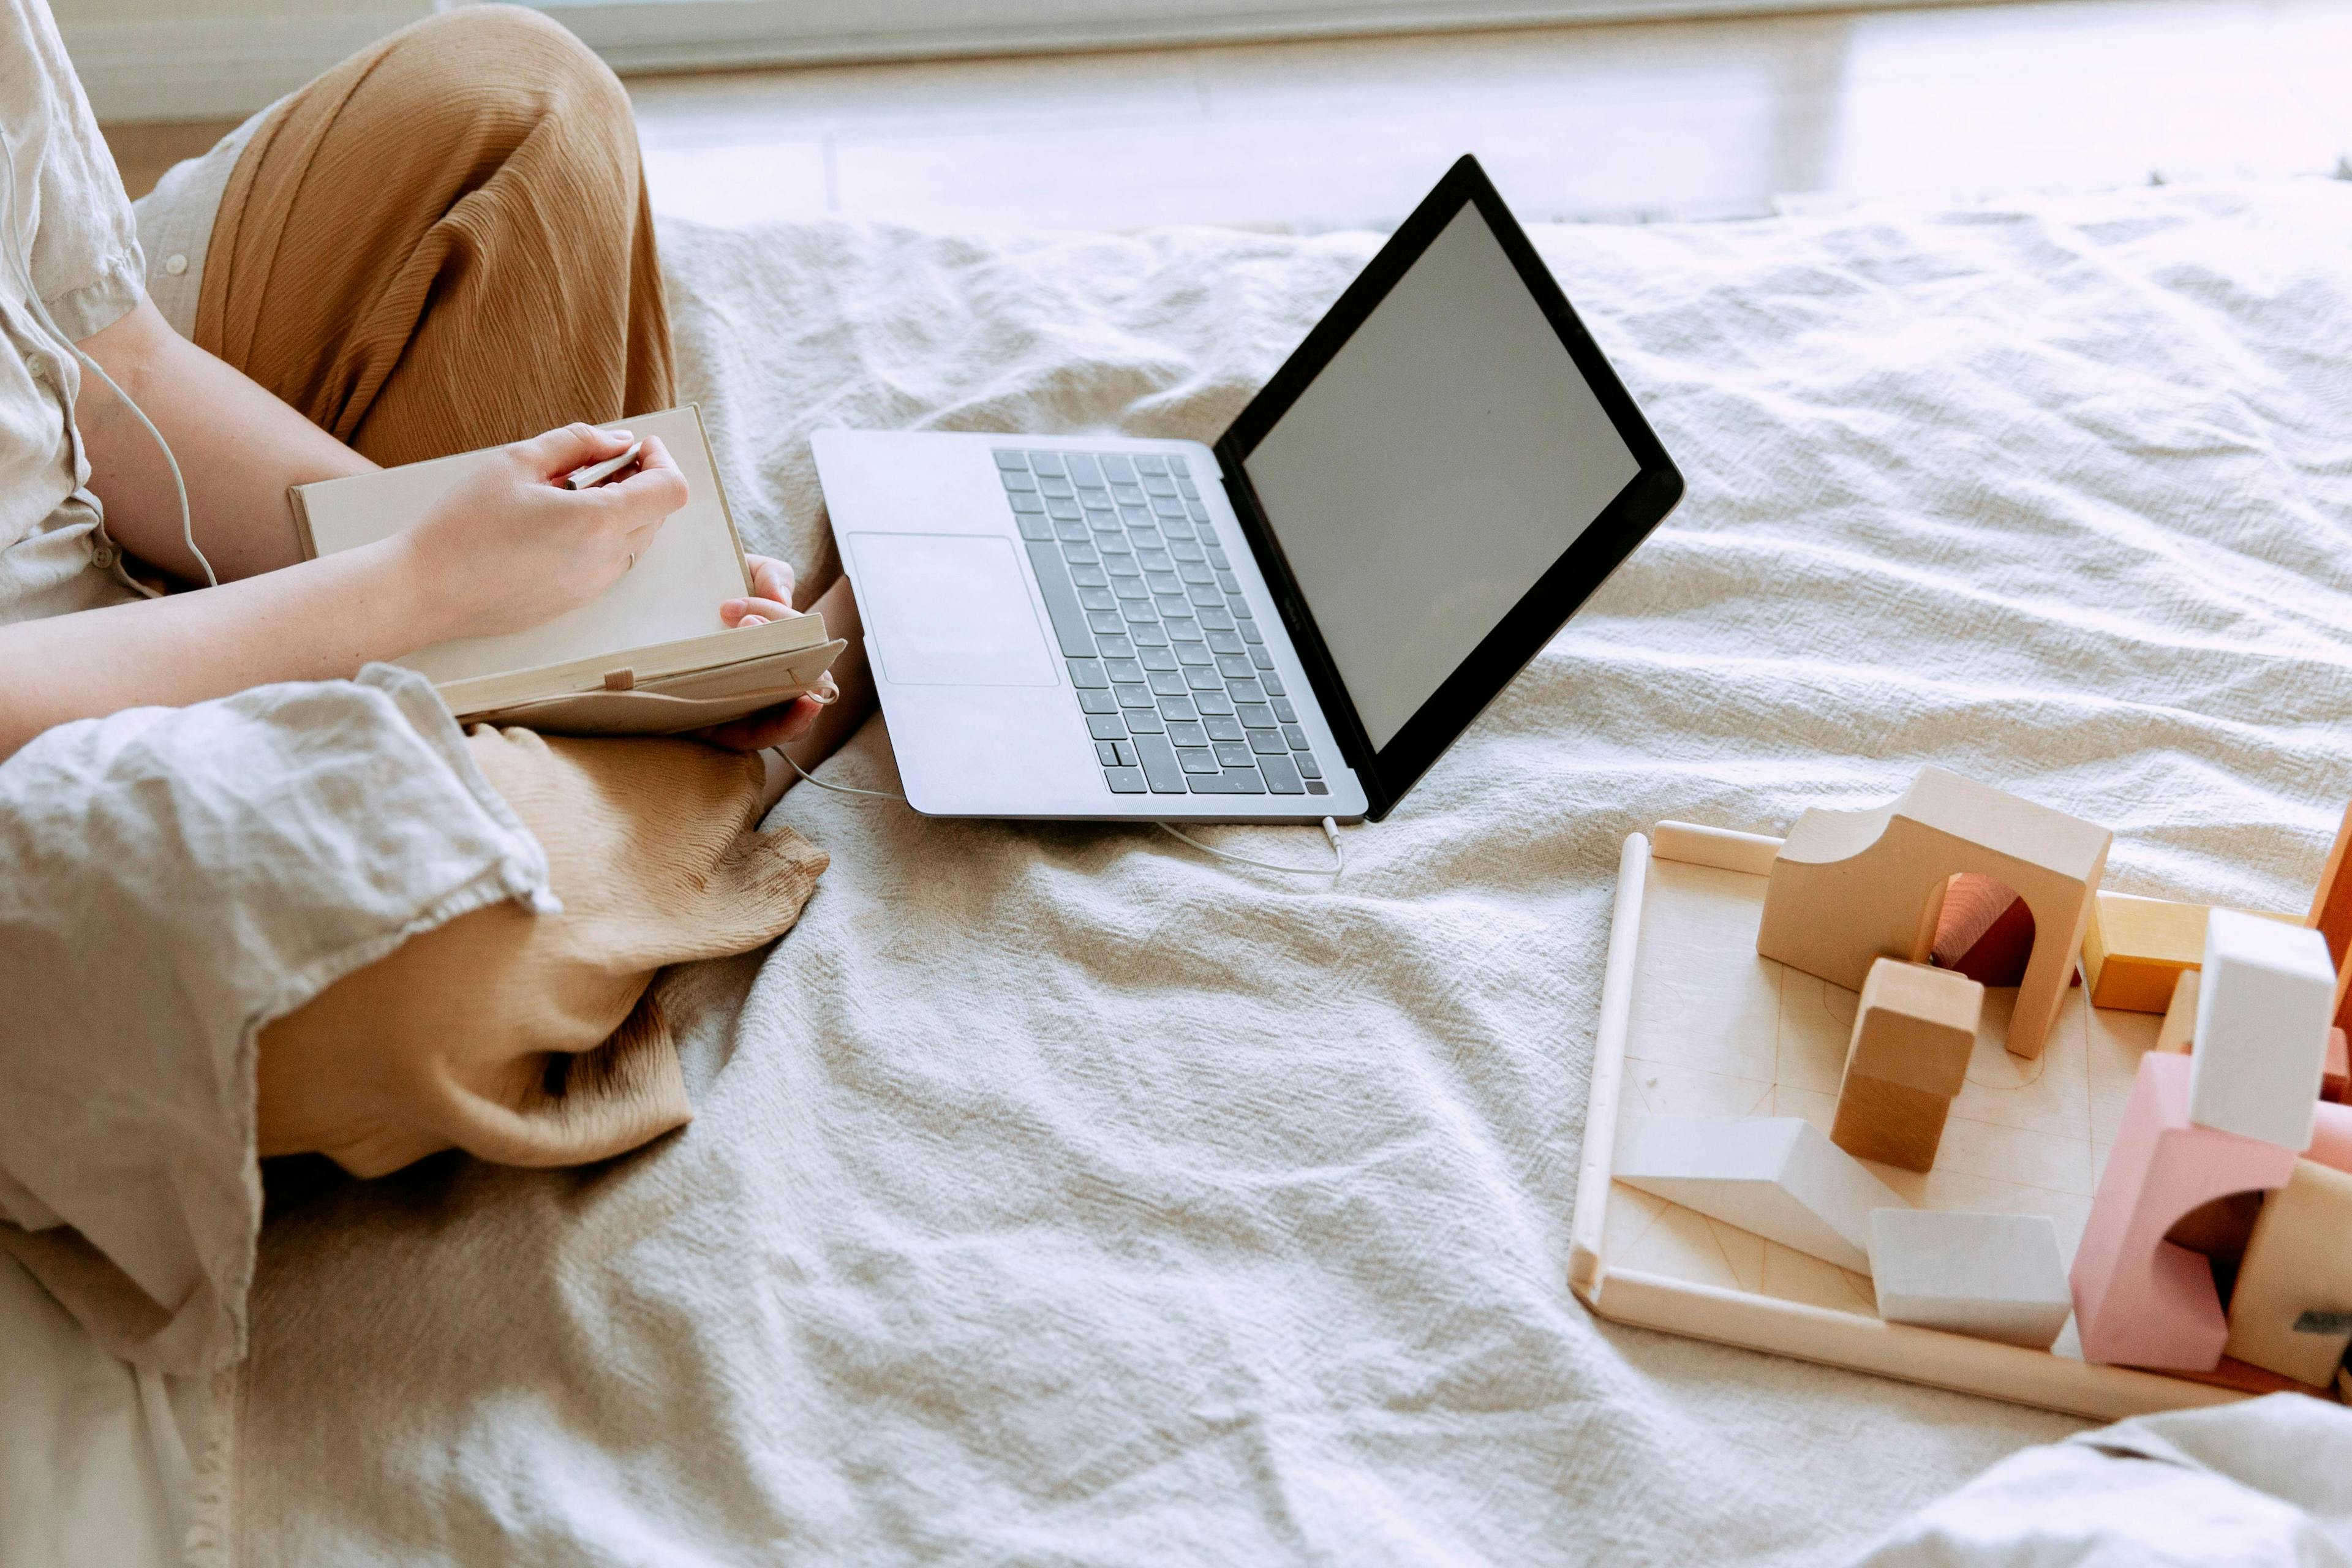 a person sitting on a bed with a laptop, writing in a notebook, and next to them are wooden building blocks. The person seems to be working from home, and a question arises: "Is lead magnetic?"